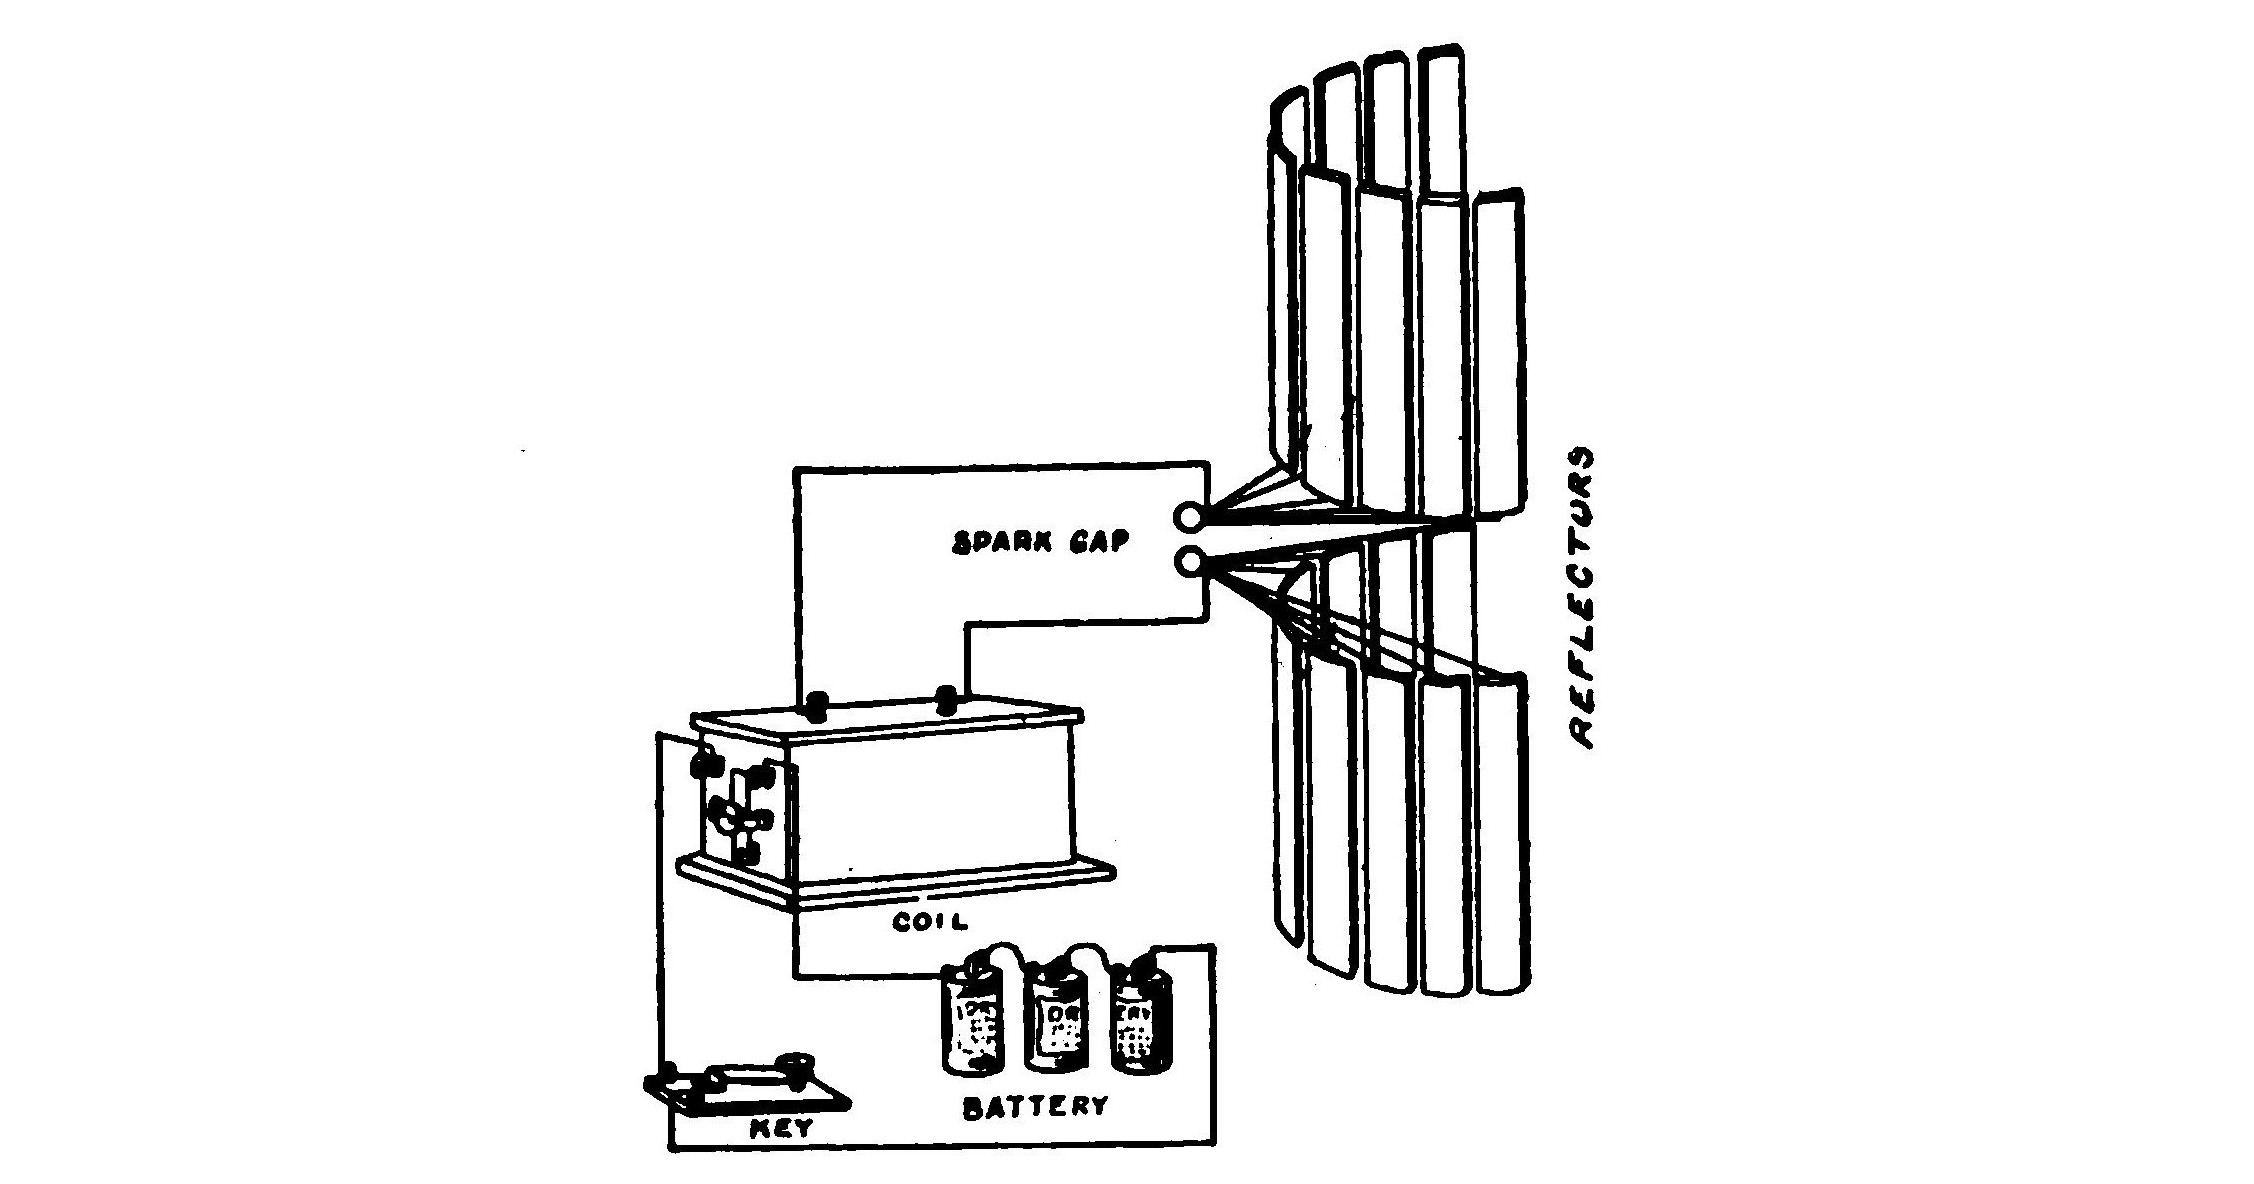 FIG. 96.—Braun's method for directing wireless telegraph signals.